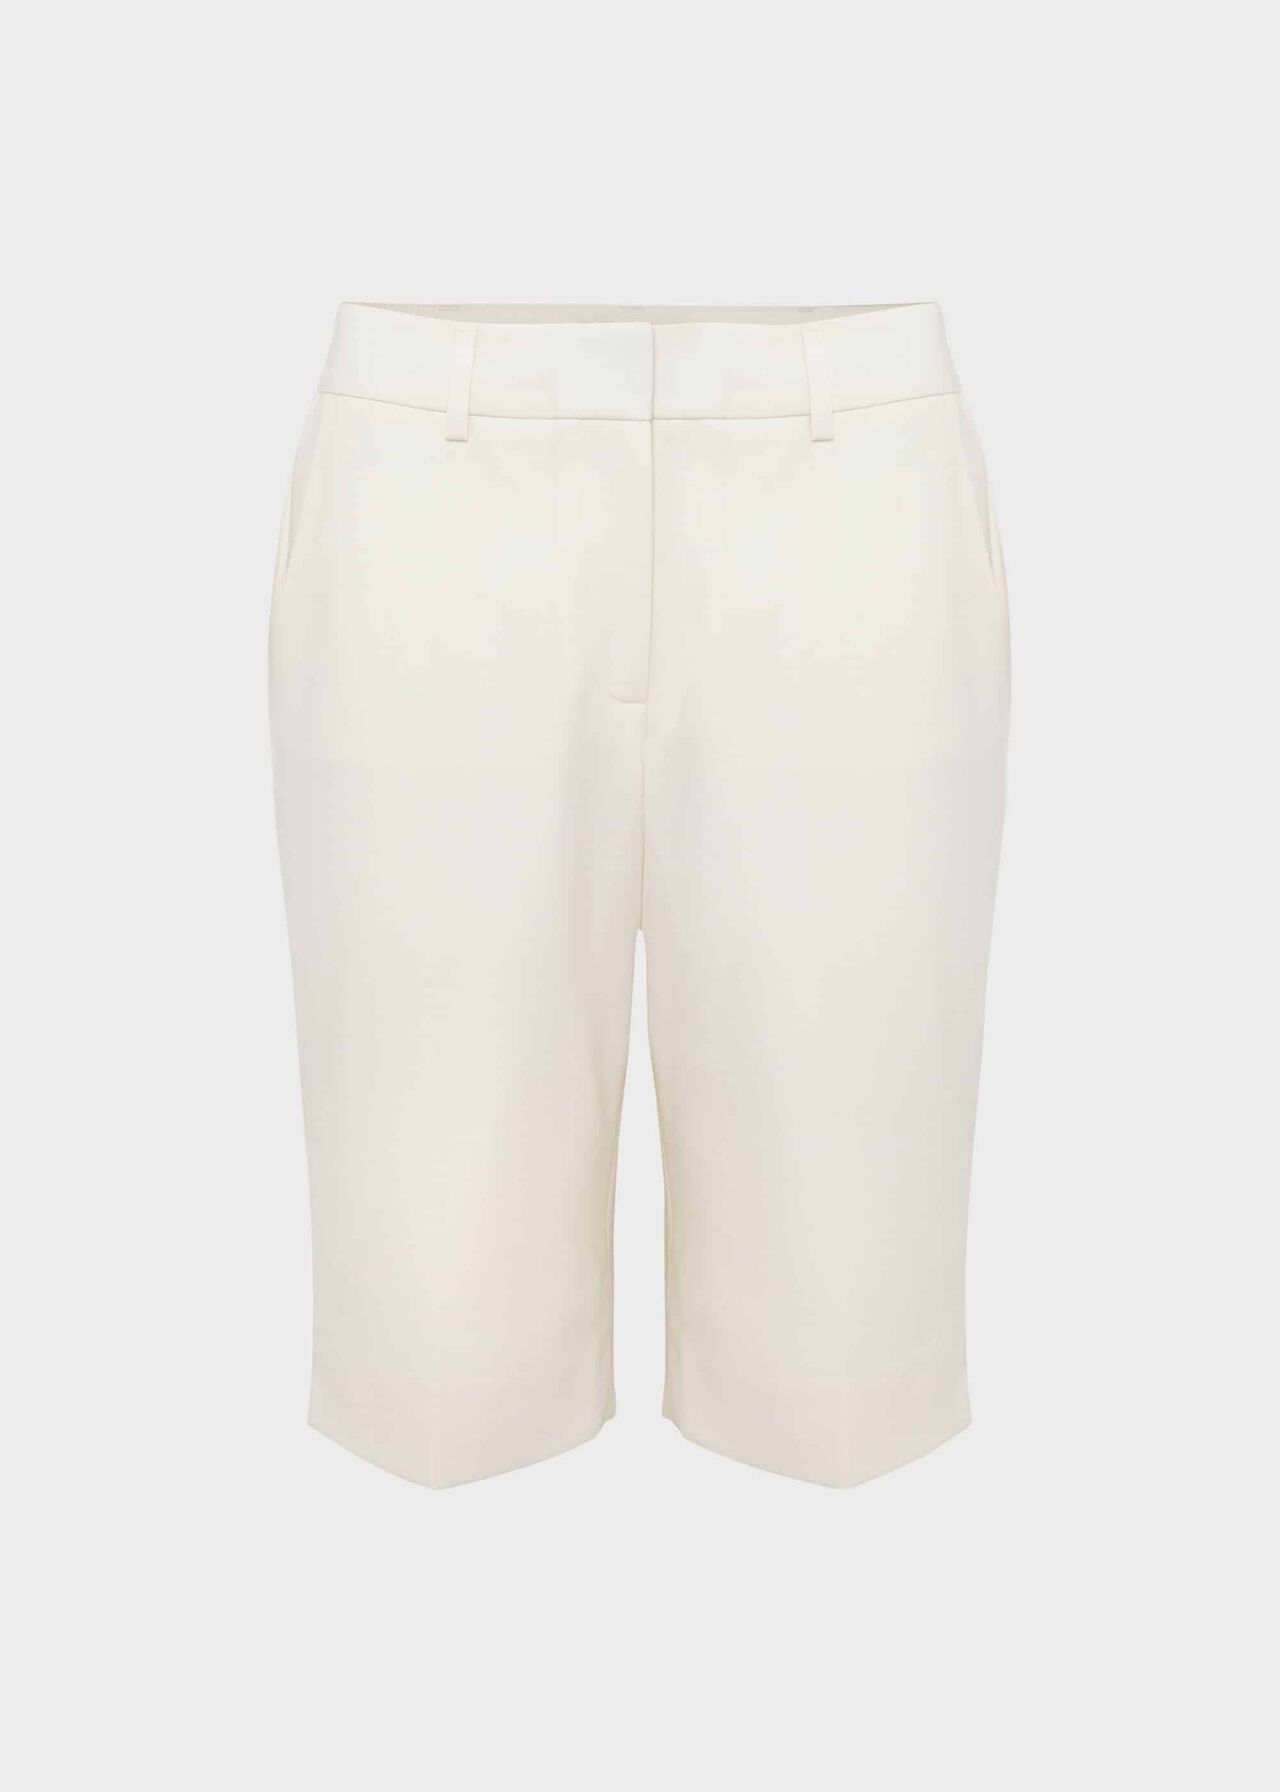 Maddy Wool Blend Shorts, Ivory, hi-res